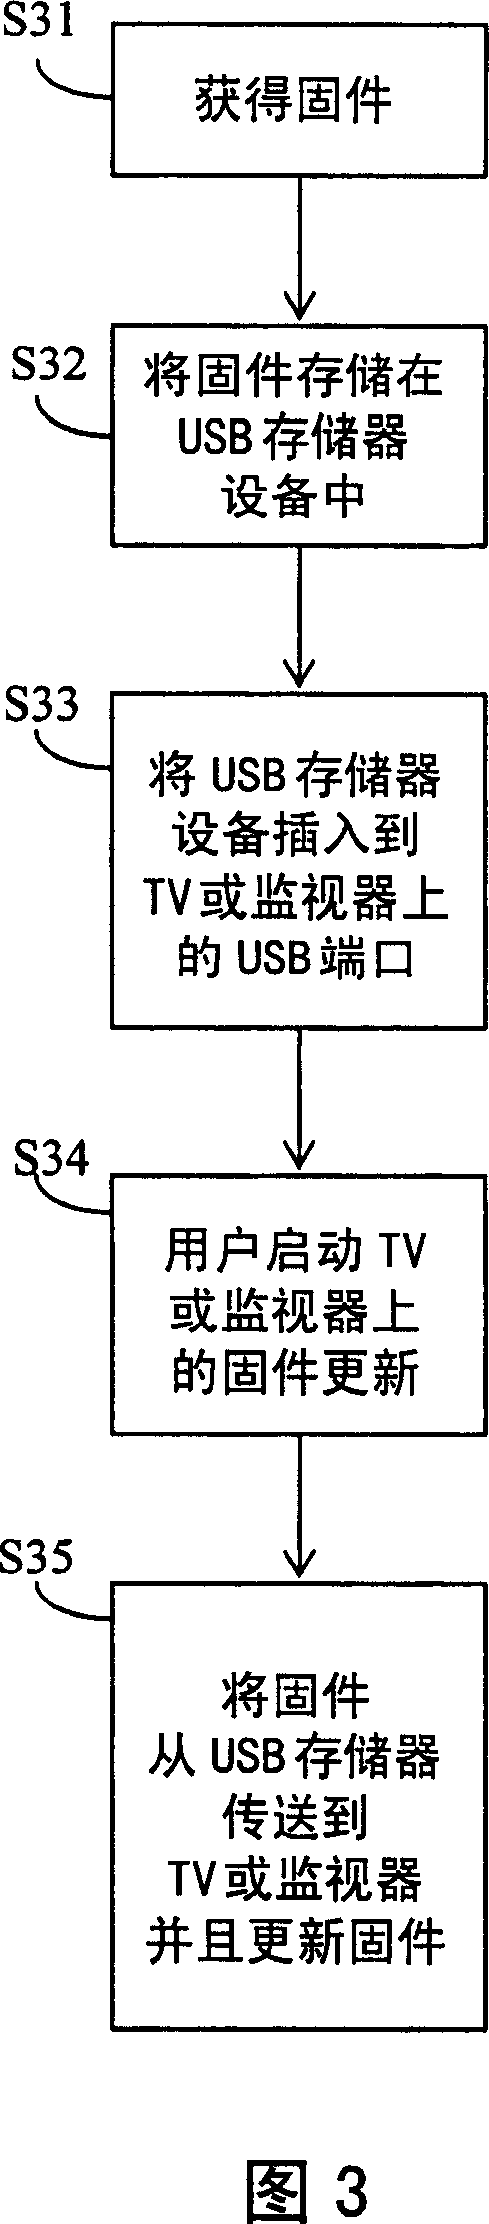 Television and display device with a USB port for updating firmware